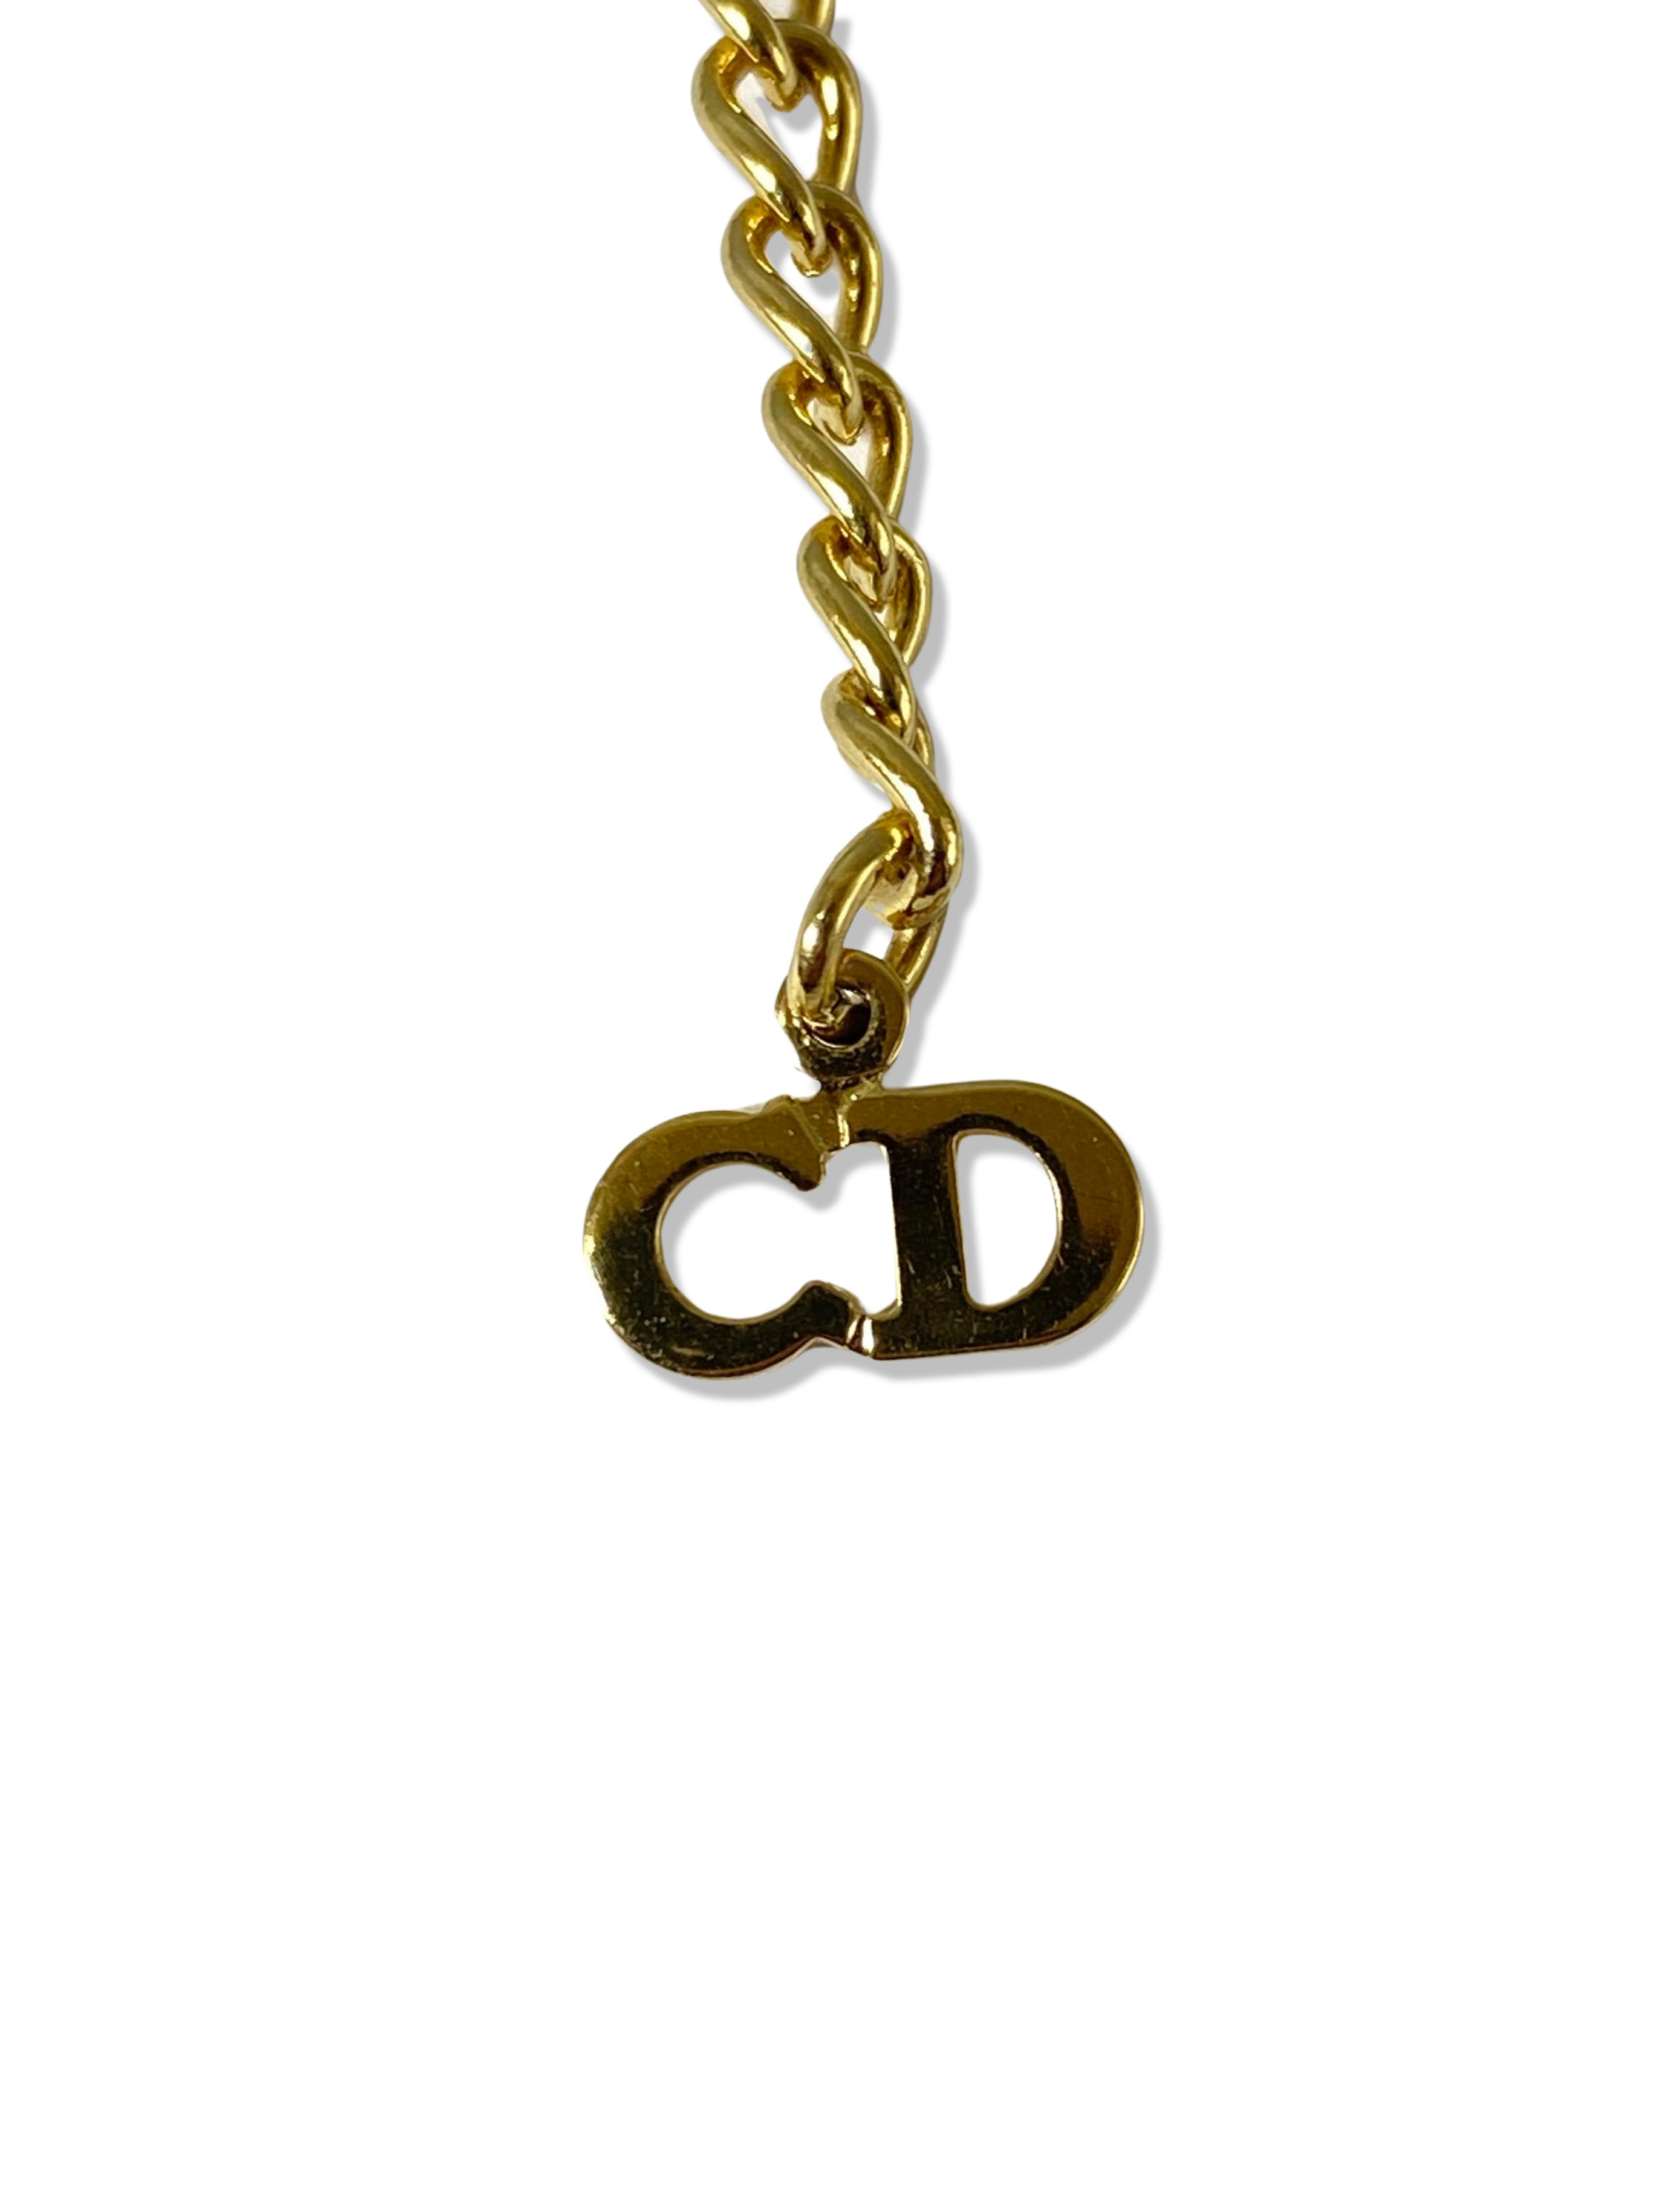 Christine Dior Gold Plated Love Heart Necklace Weighing 8.03 grams and 44cm in length - Image 3 of 3